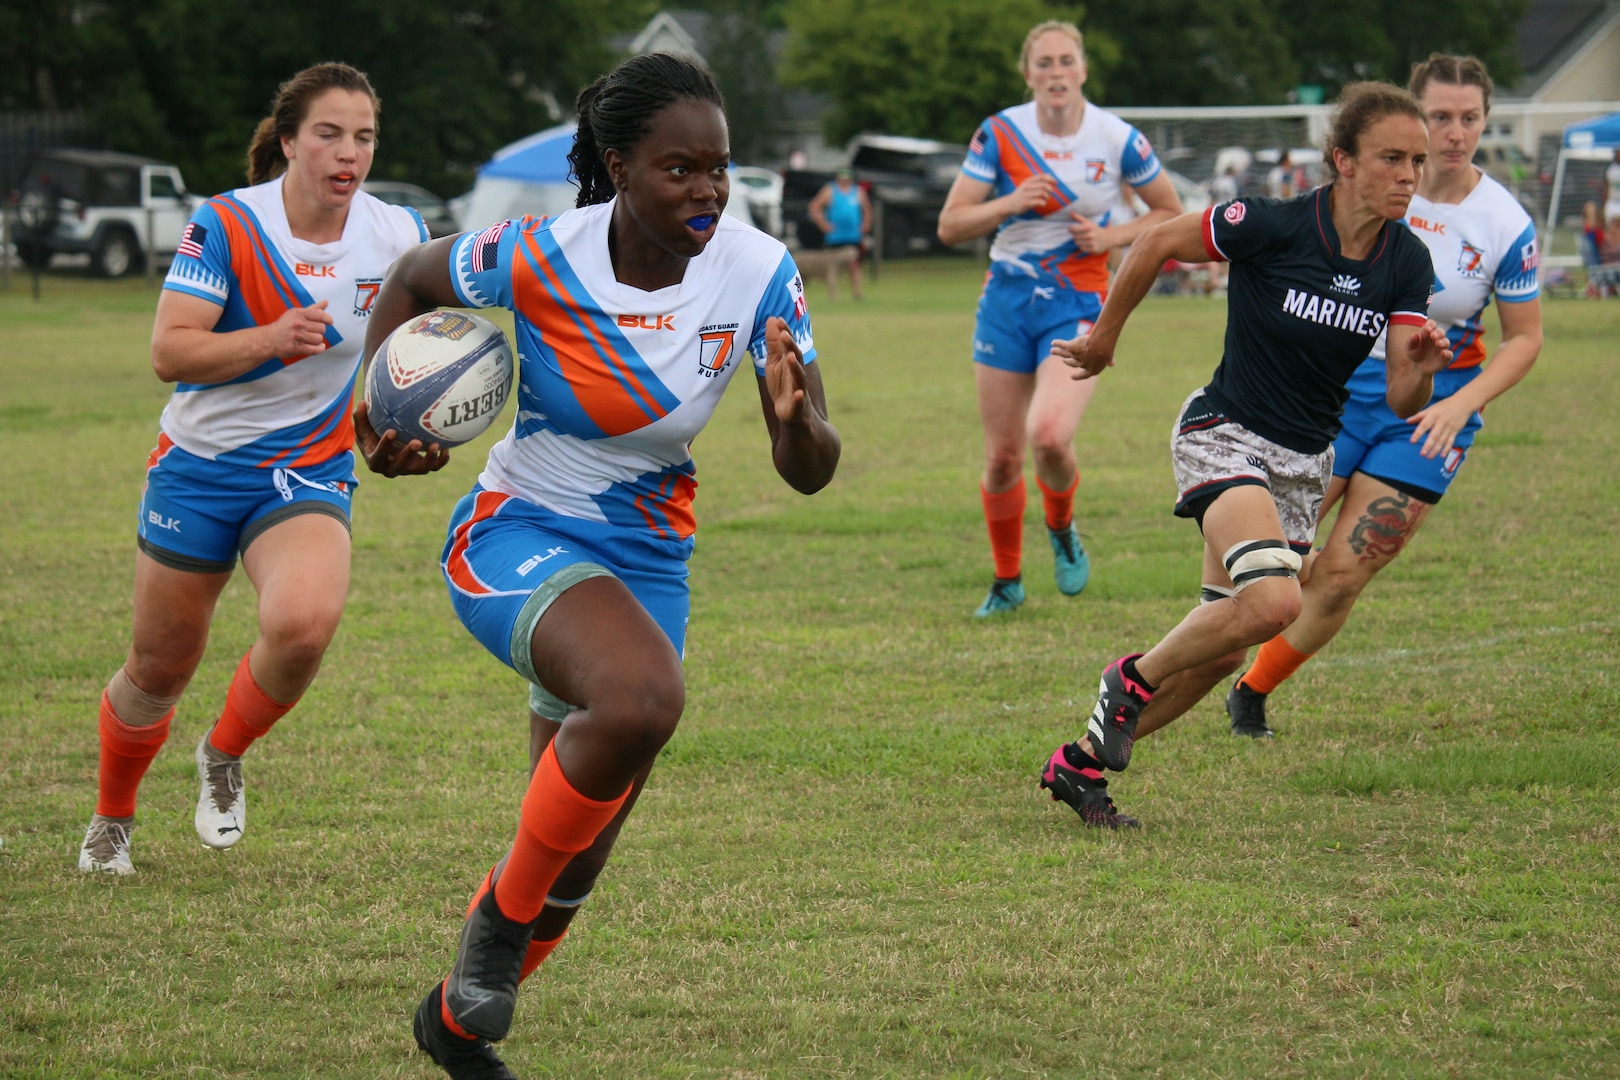 2023 Armed Forces Sports Women's Rugby Championship held in conjunction with the Cape Fear 7's Rugby Tournament in Wilmington, N.C.  Championship features teams from the Army, Marine Corps, Navy, Air Force (with Space Force players), and Coast Guard.  (Dept. of Defense Photo by Mr. Steven Dinote, Released)